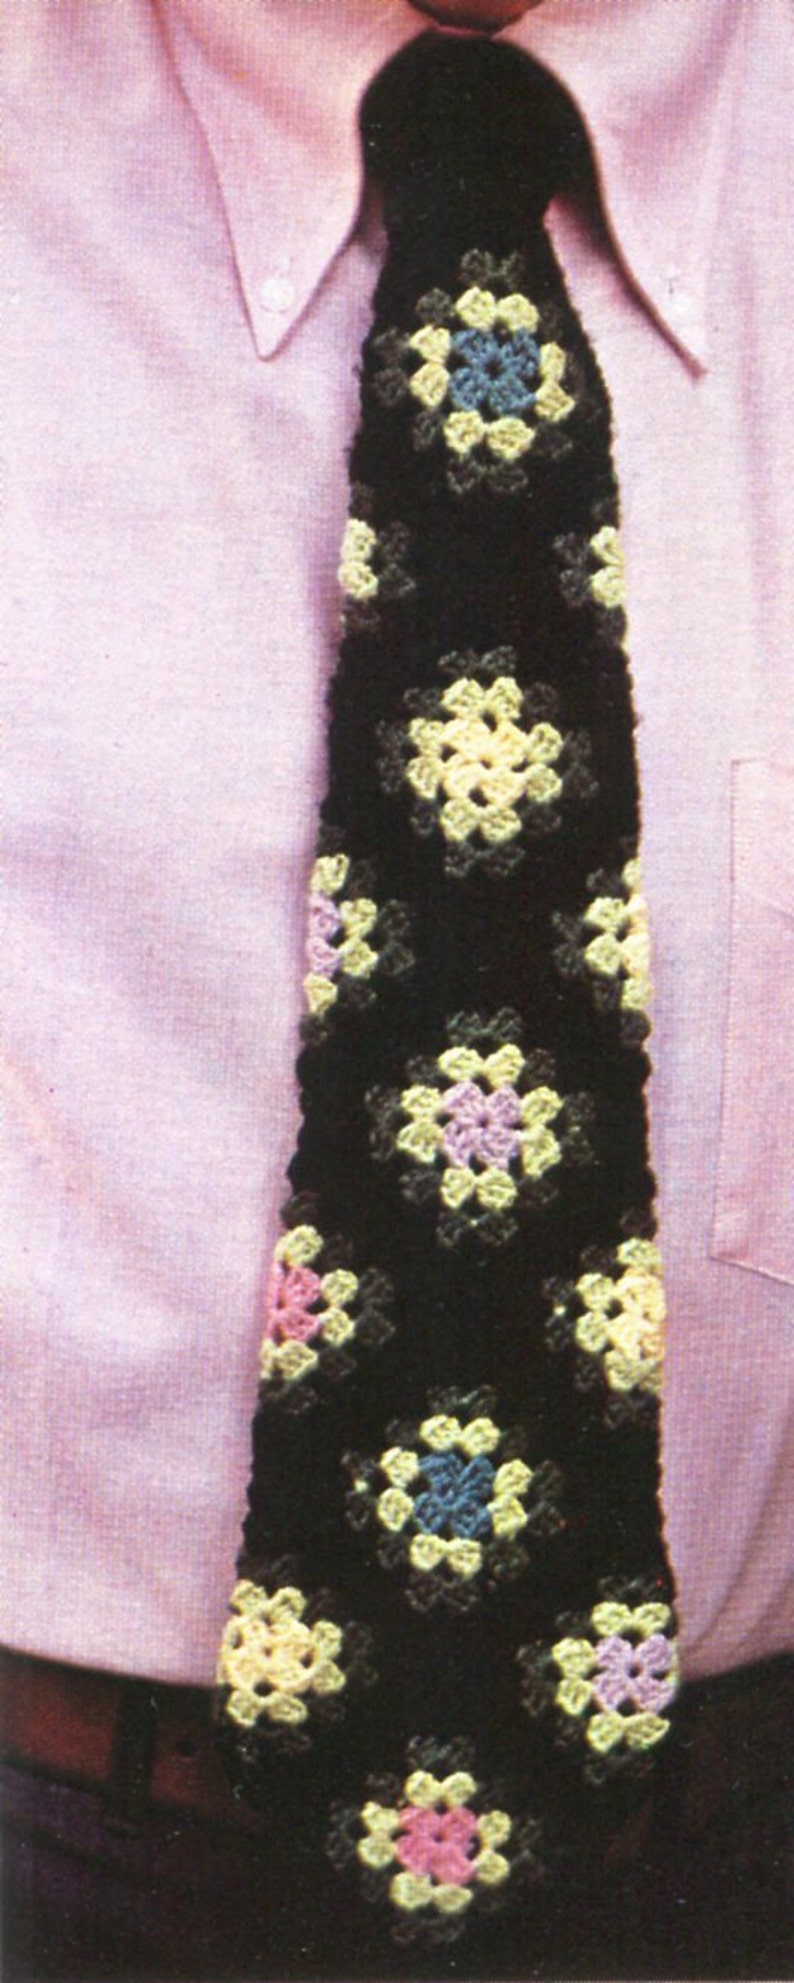 Groovy vintage colors pink, purple, and baby blue crocheted men's tie.